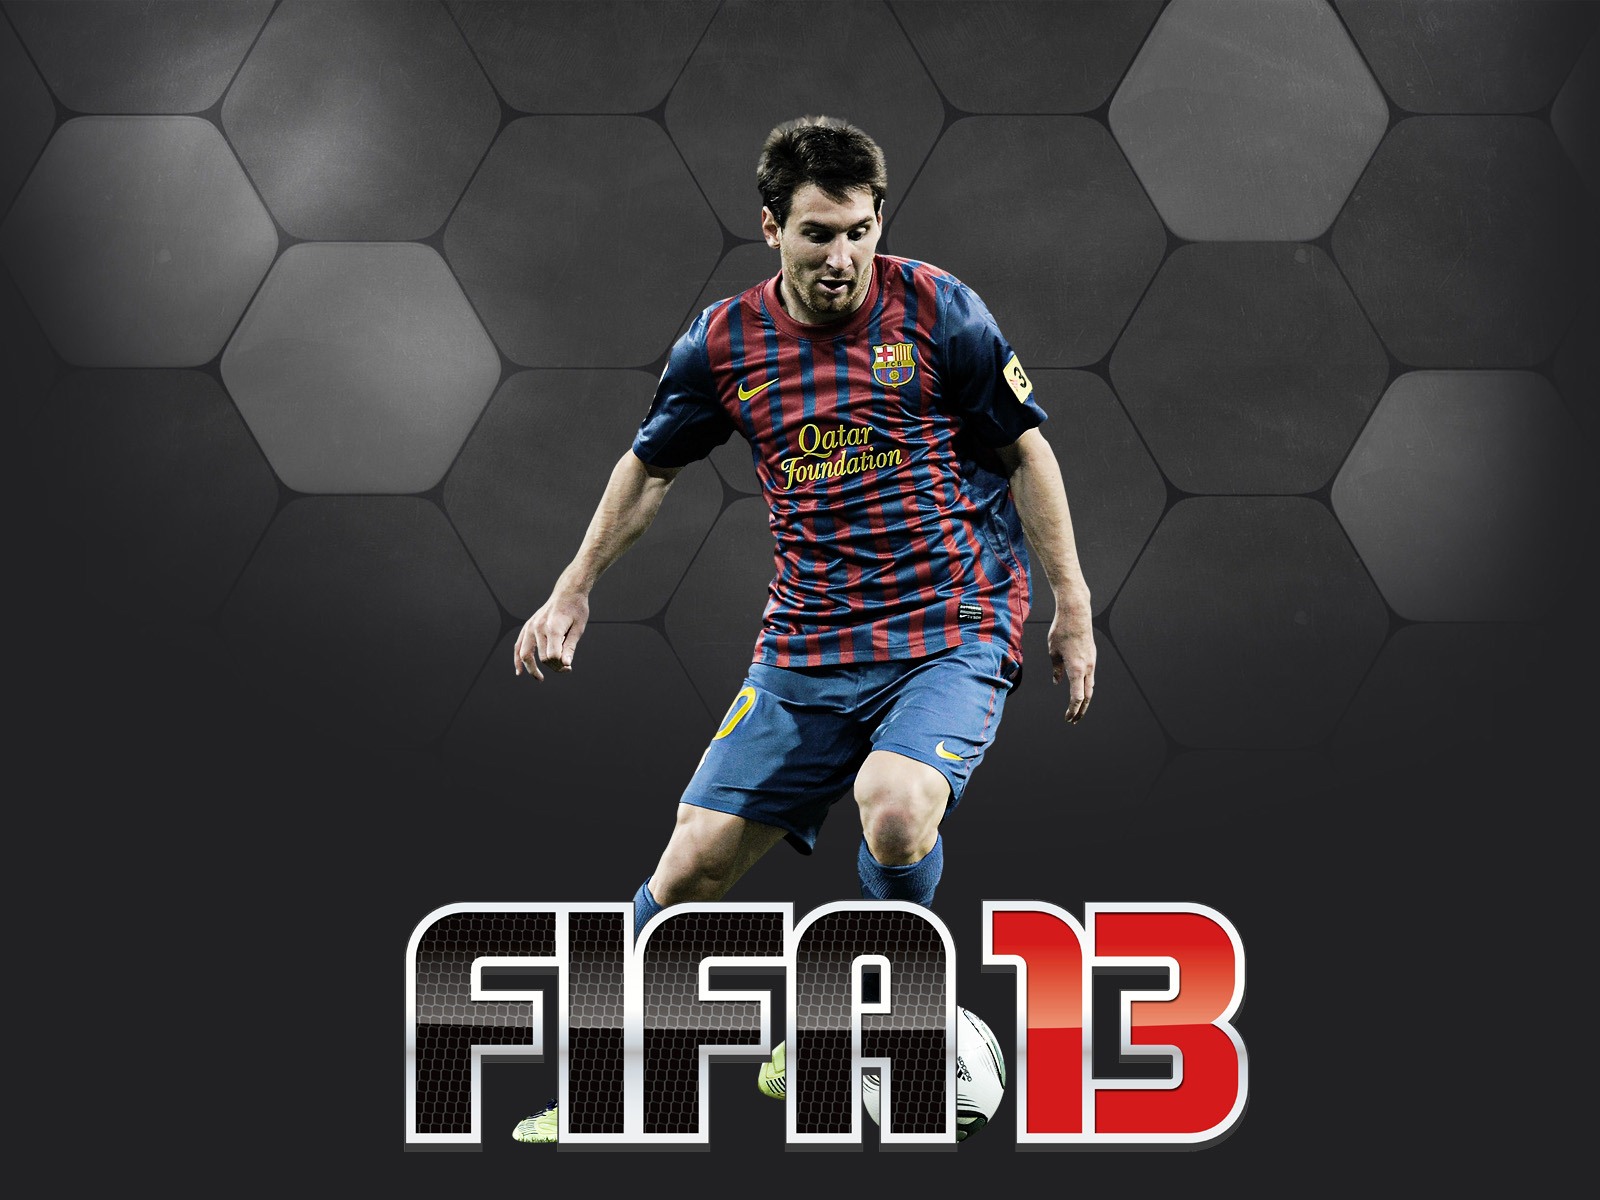 FIFA 13 game HD wallpapers #6 - 1600x1200